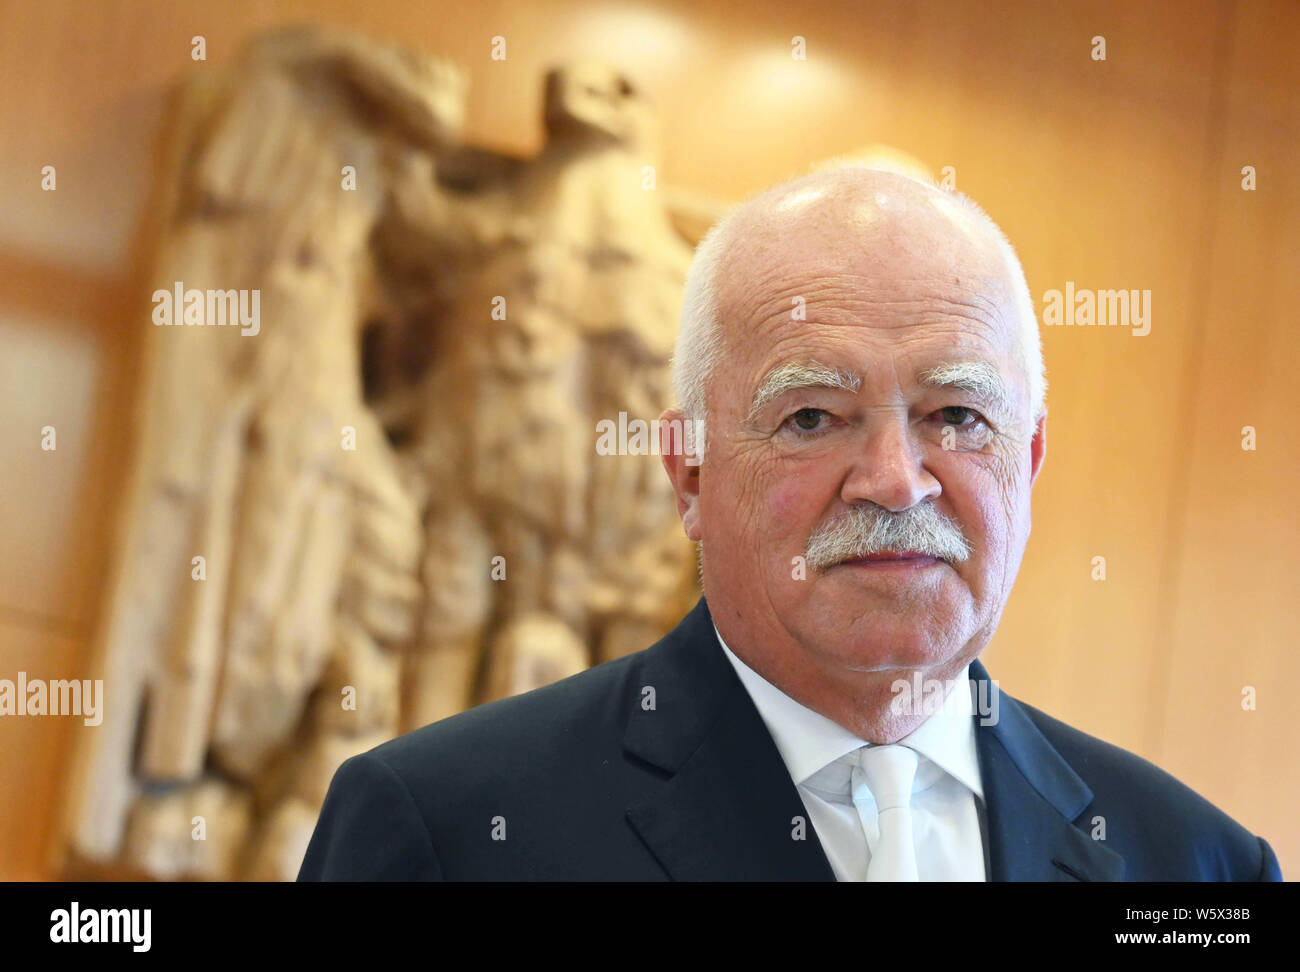 Karlsruhe, Germany. 30th July, 2019. Peter Gauweiler, as a complainant in the Federal Constitutional Court, is waiting for the start of oral proceedings on extensive purchases of government bonds by the European Central Bank (ECB). Credit: Uli Deck/dpa/Alamy Live News Stock Photo